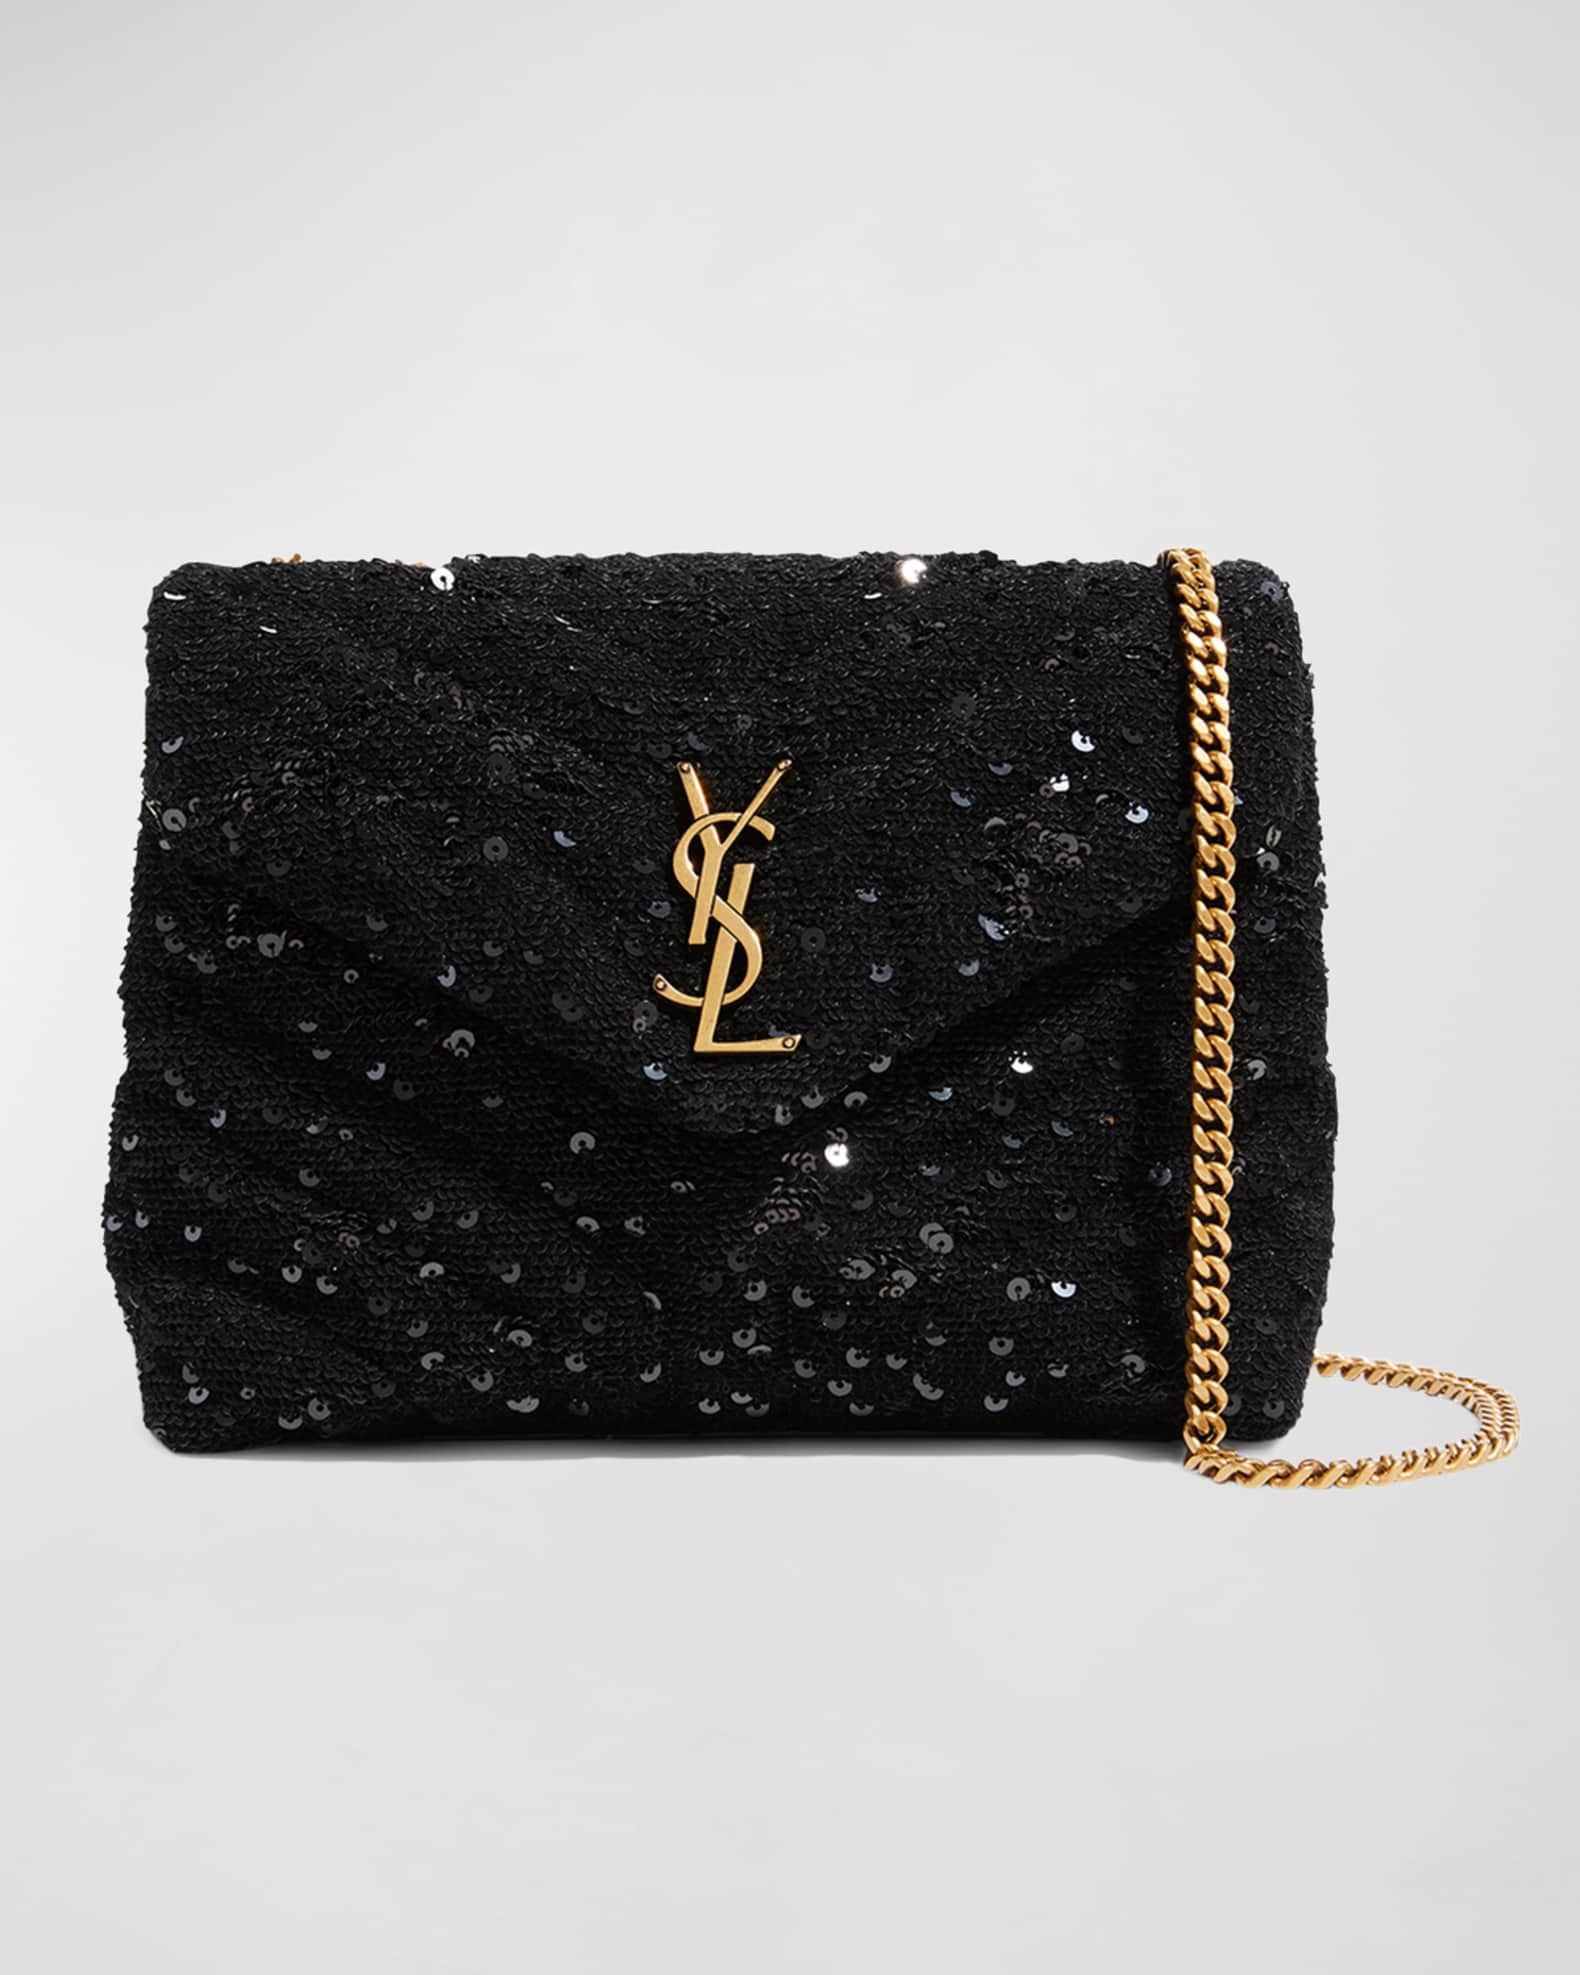 HOW TO STYLE YSL LOU LOU including different occasions and ways to wear the  handbag